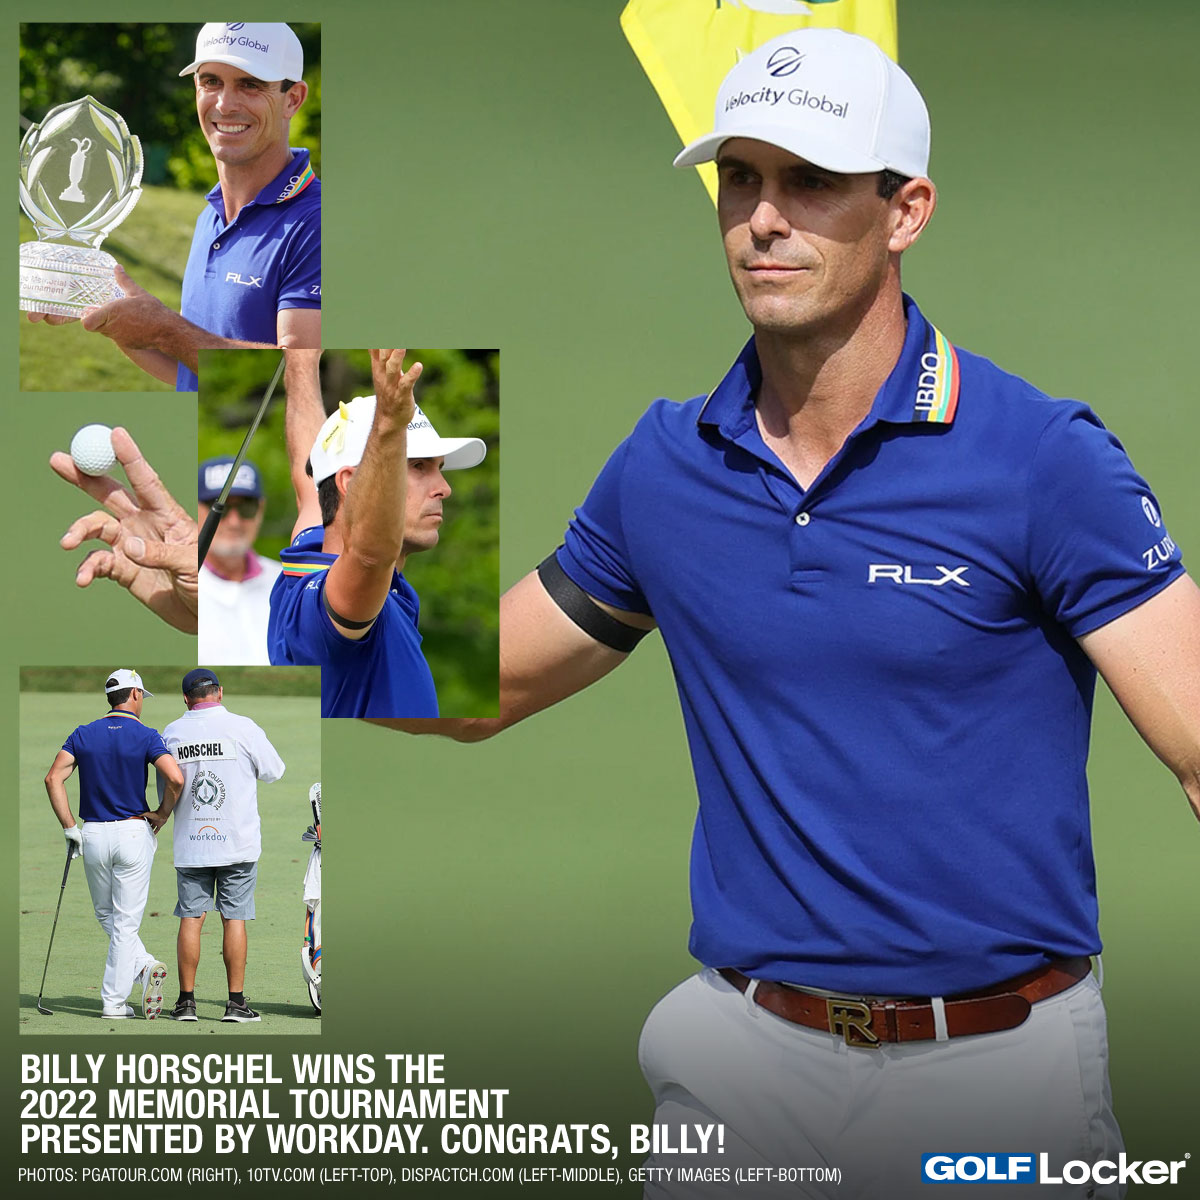 Billy Horschel Wins the 2022 Memorial Tournament presented by Workday. Congrats, Billy!